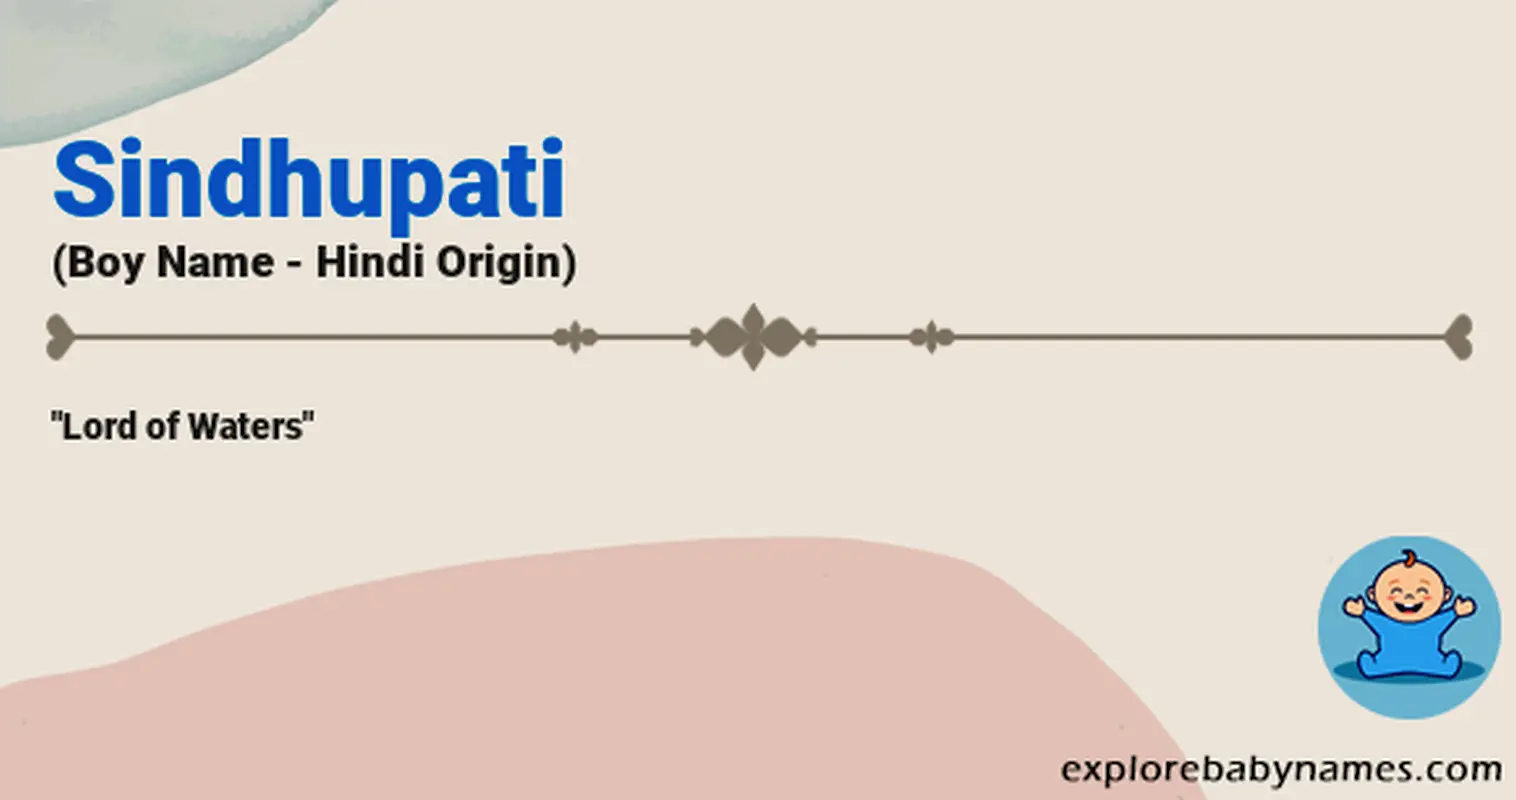 Meaning of Sindhupati